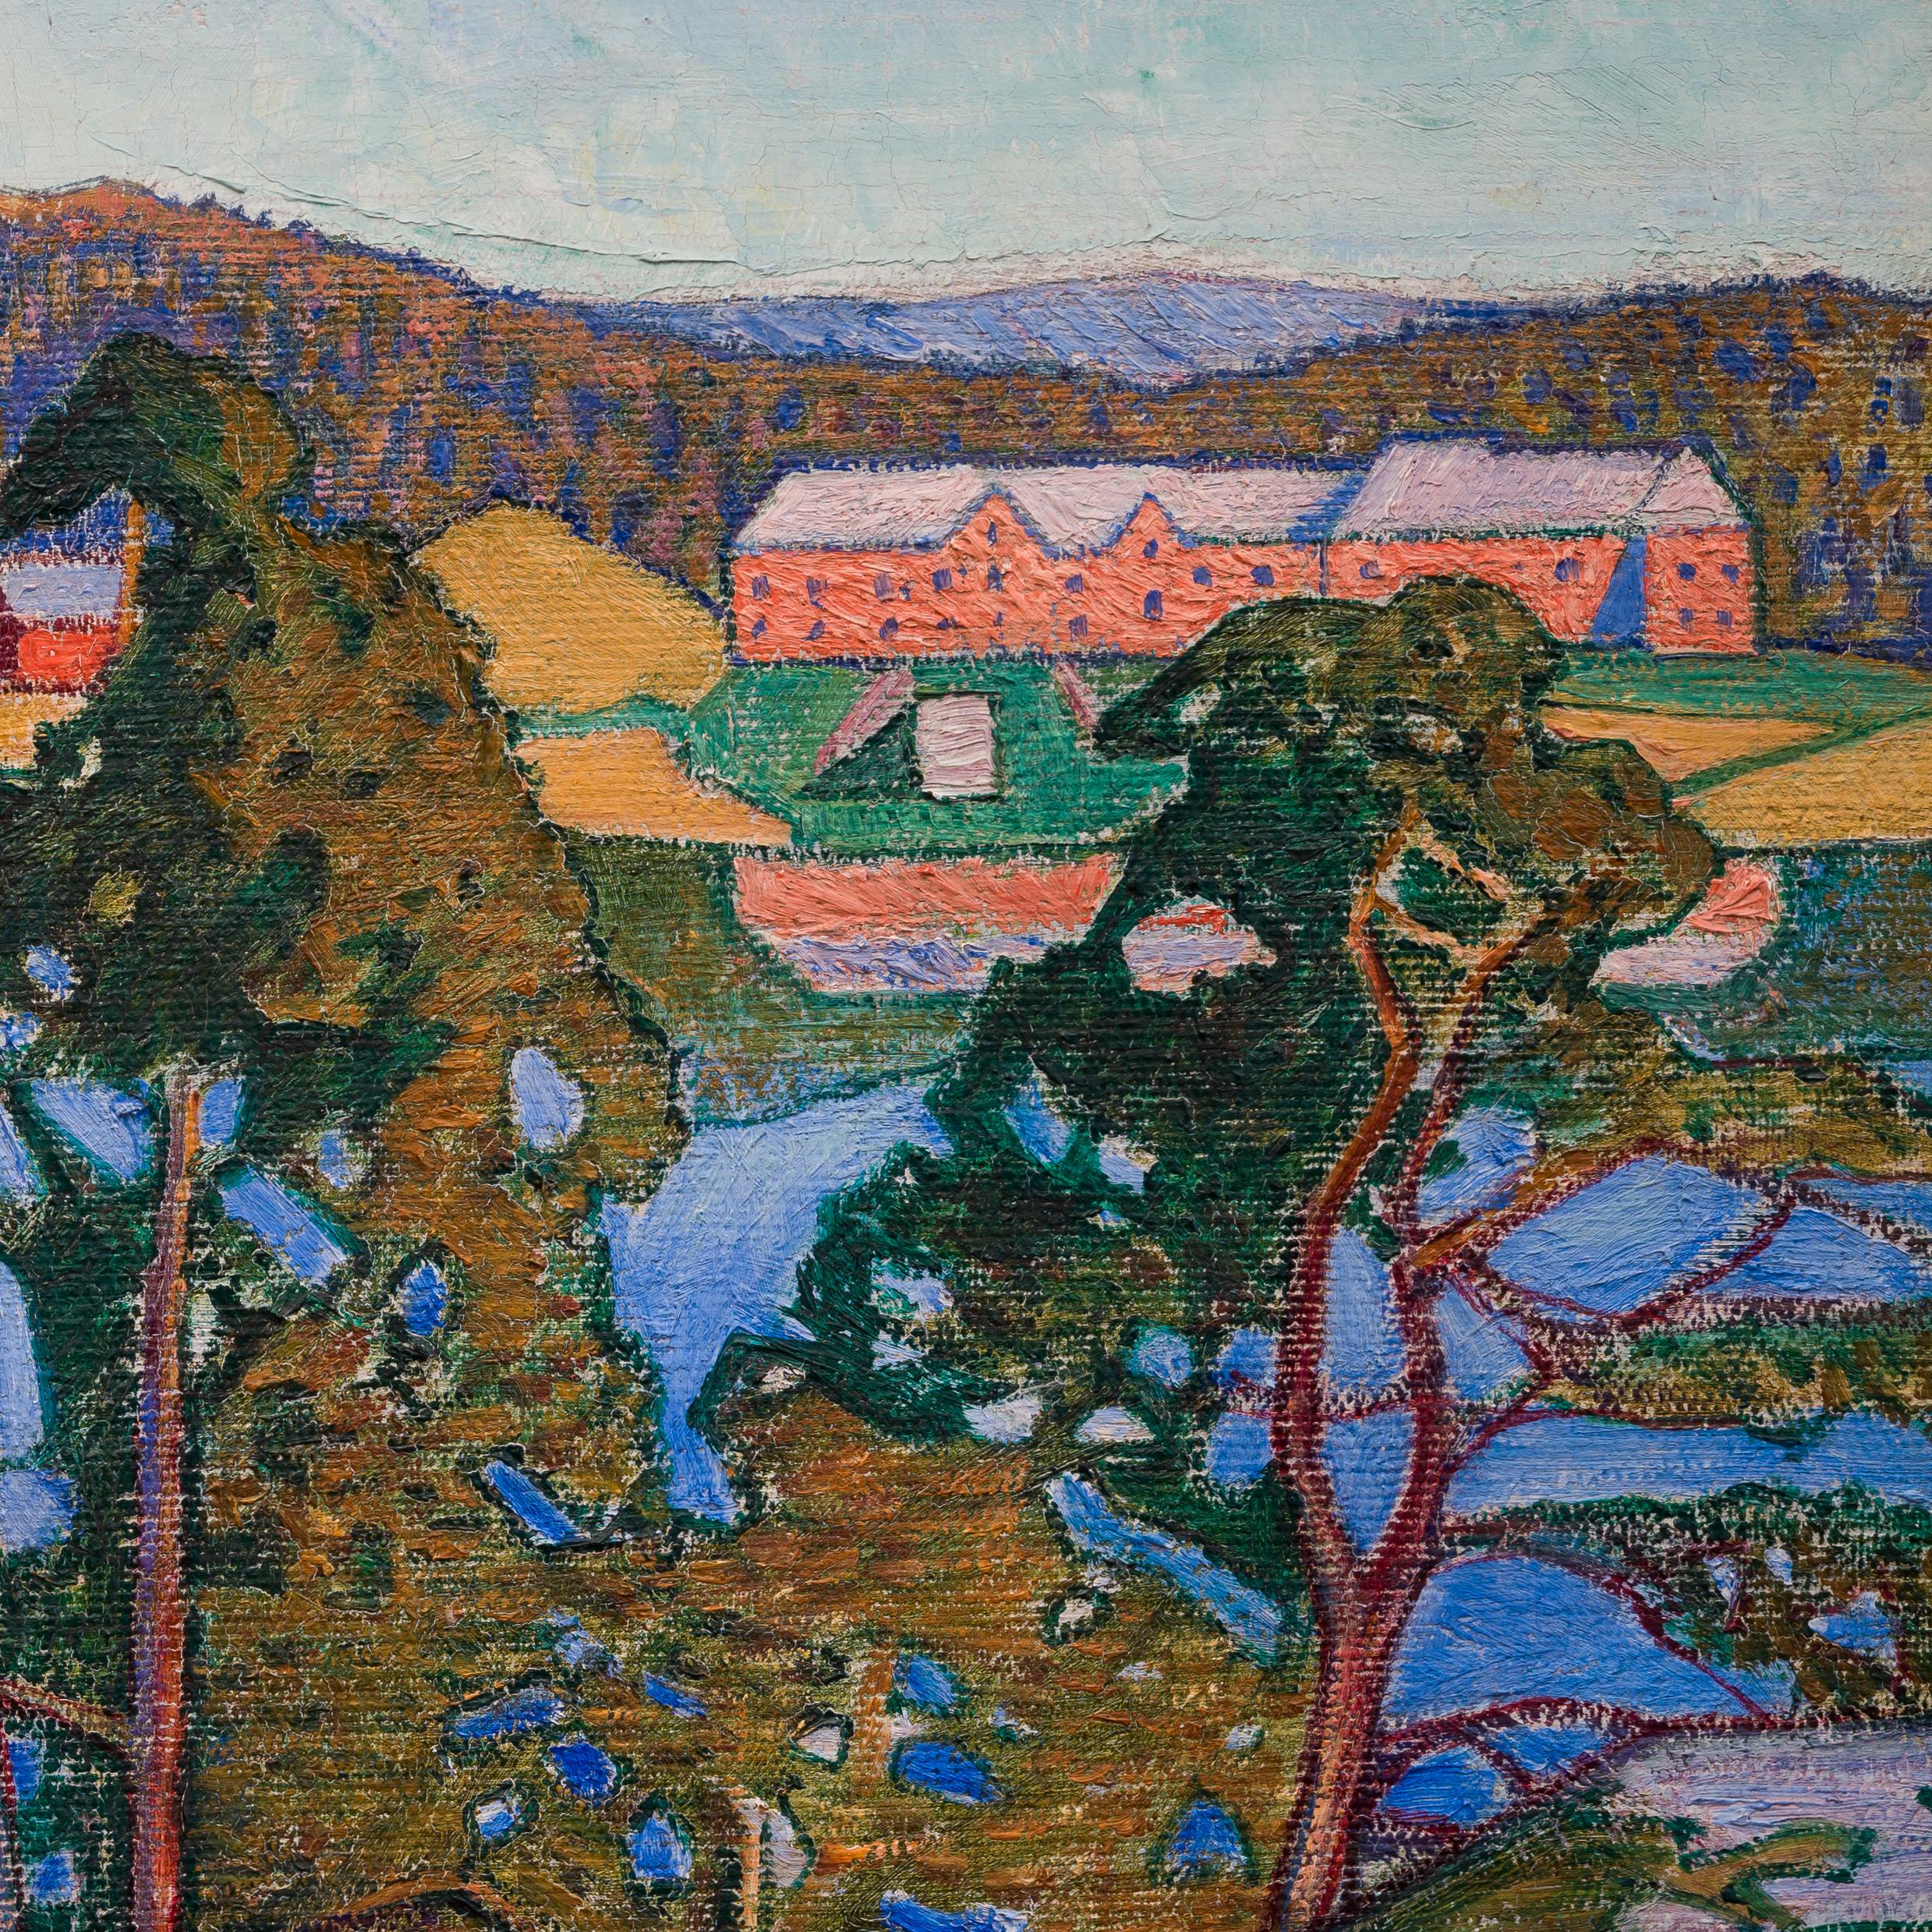 We are delighted to present this landscape painting by the Swedish artist, Gabriel Strandberg (1885-1966). While the exact location is still unknown, the beauty and characteristics of the scene suggest the northern terrains of Sweden, possibly the